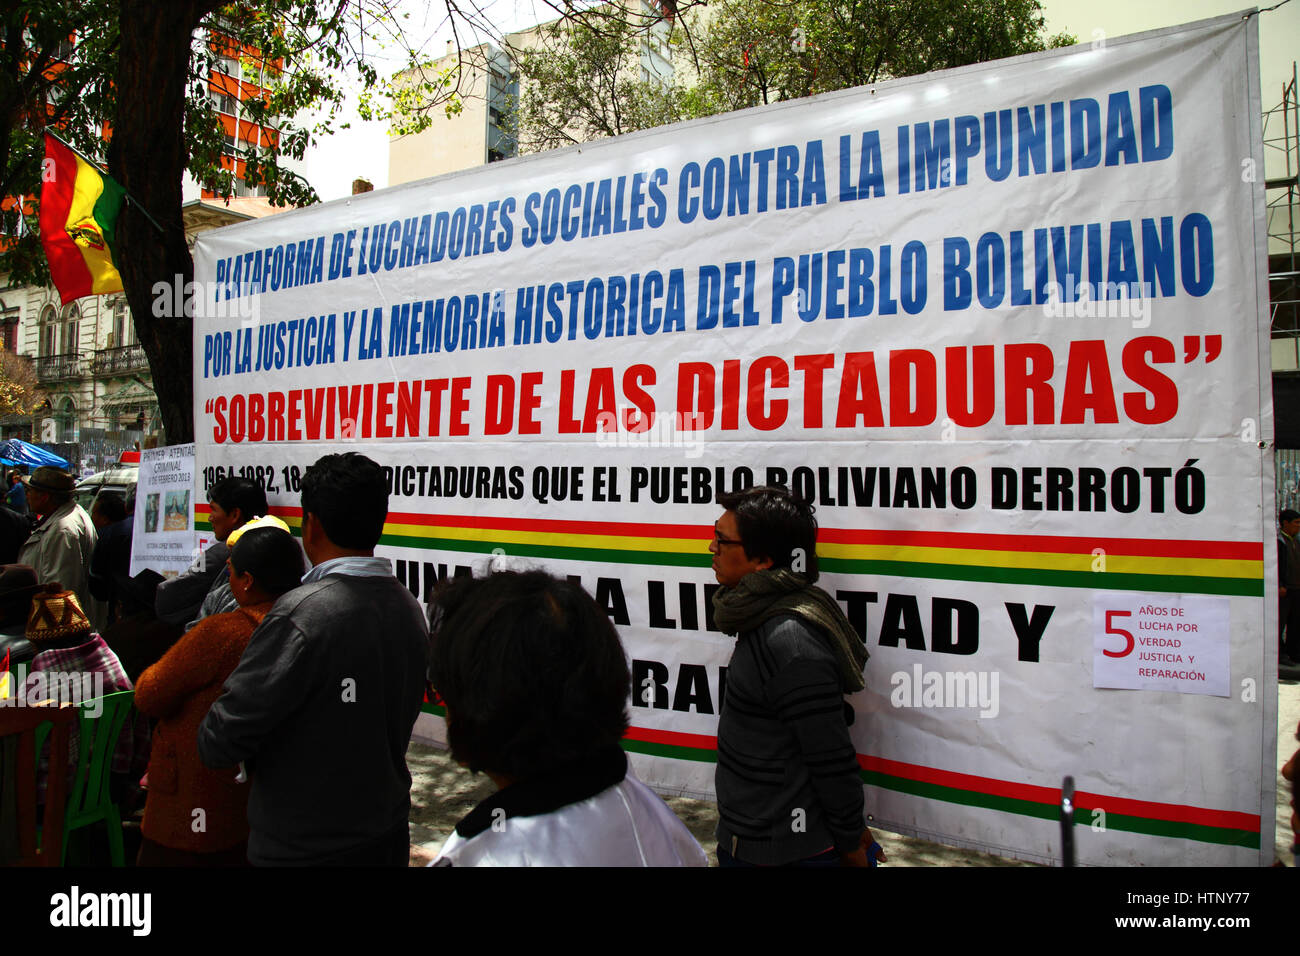 La Paz, Bolivia, 13th March 2017. People at a meeting organised by the victims of  military dictatorships to commemorate 5 years of protests demanding justice and compensation for those that suffered, and that the government releases files from the period to help establish the truth about what happened. Credit: James Brunker/Alamy Live News Stock Photo